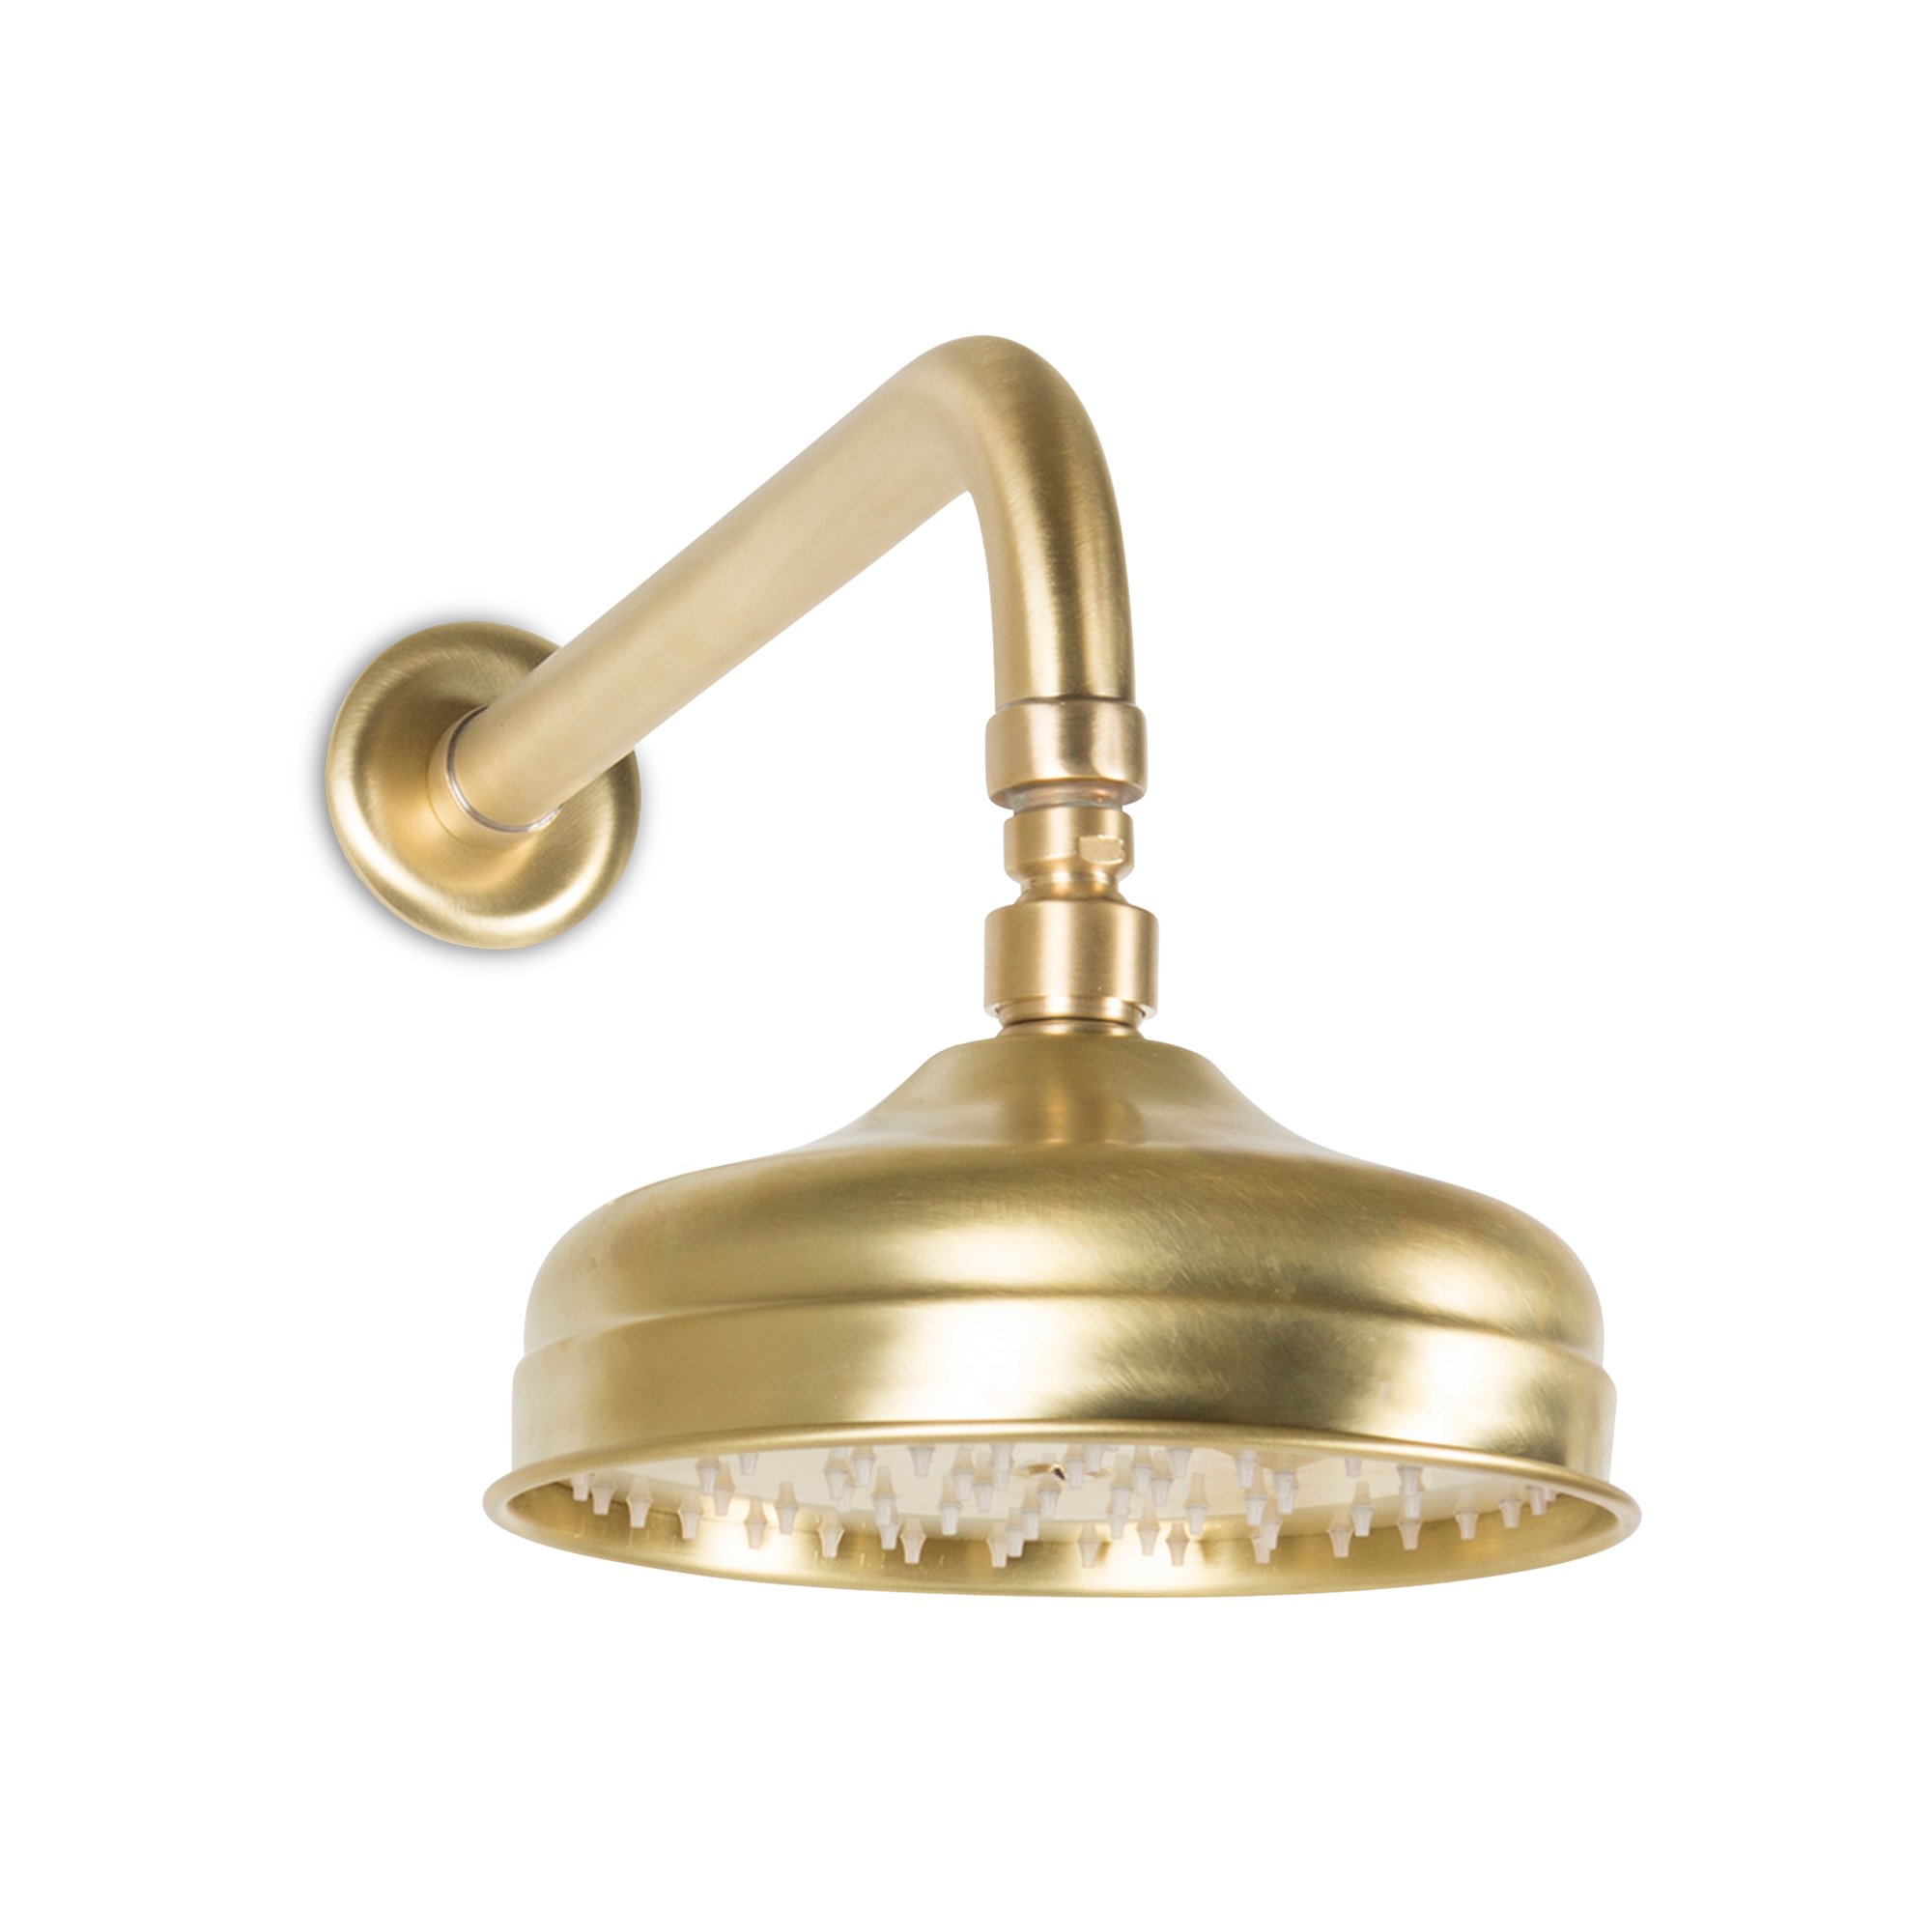 A traditional, elegant piece, the Regal Shower Head is sleek and detailed with a ridged base.